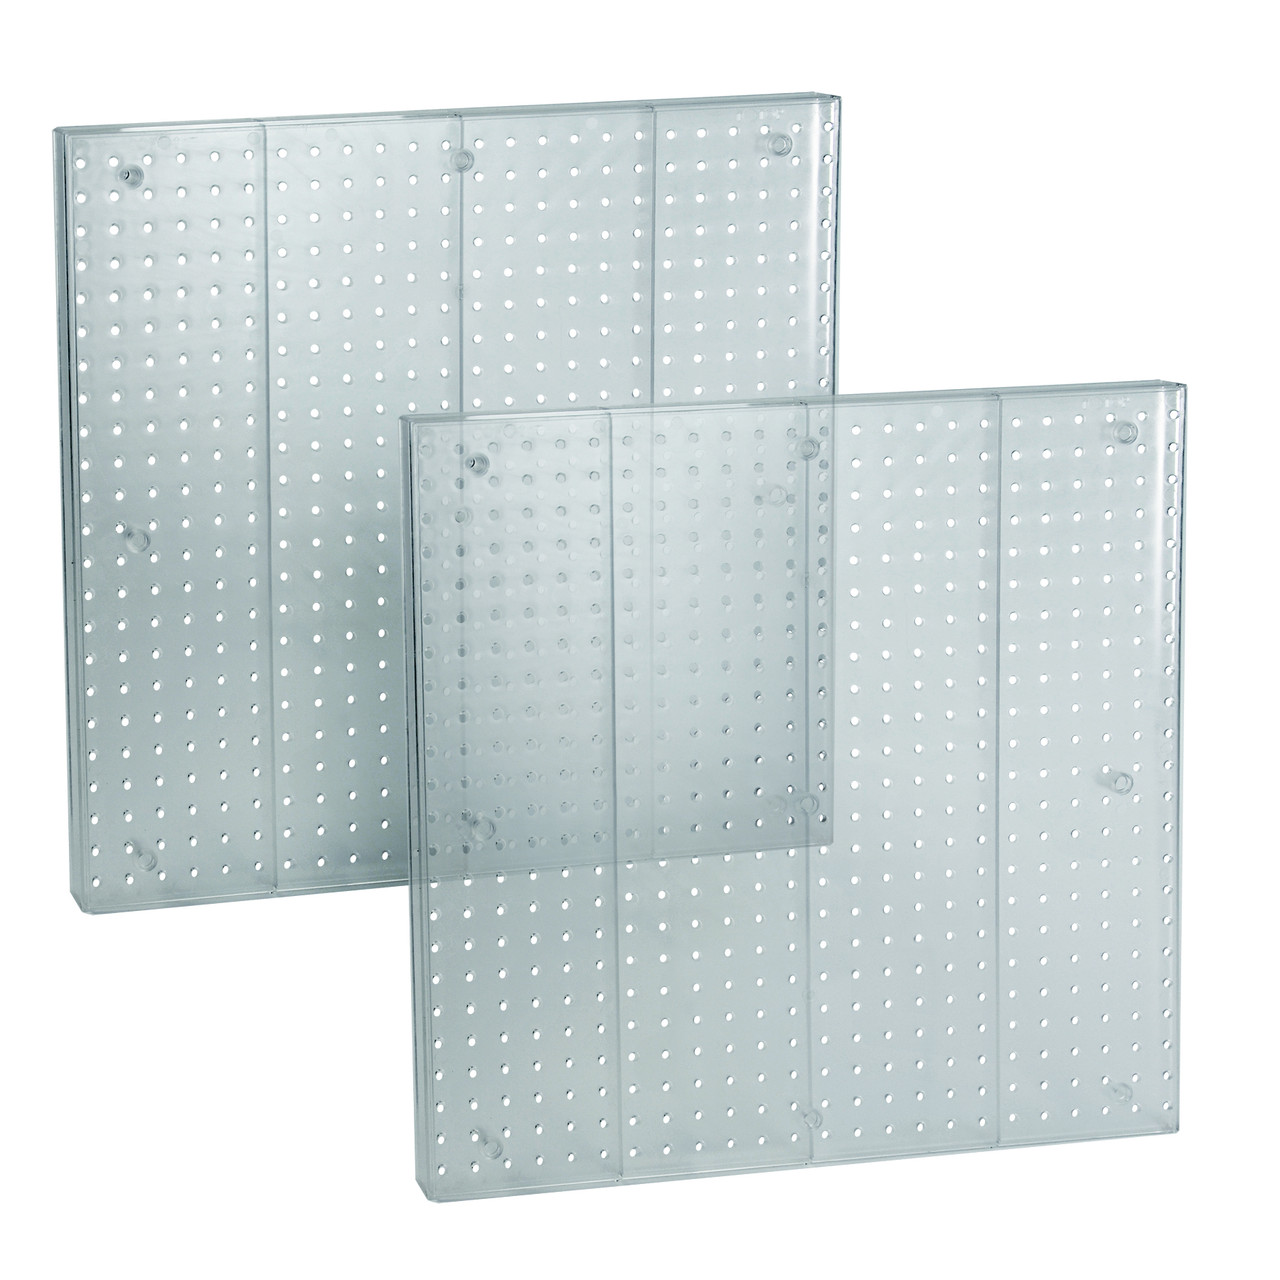 Pegboard Wall Panel Storage Solution, Size: 24x 24, 2-Pack